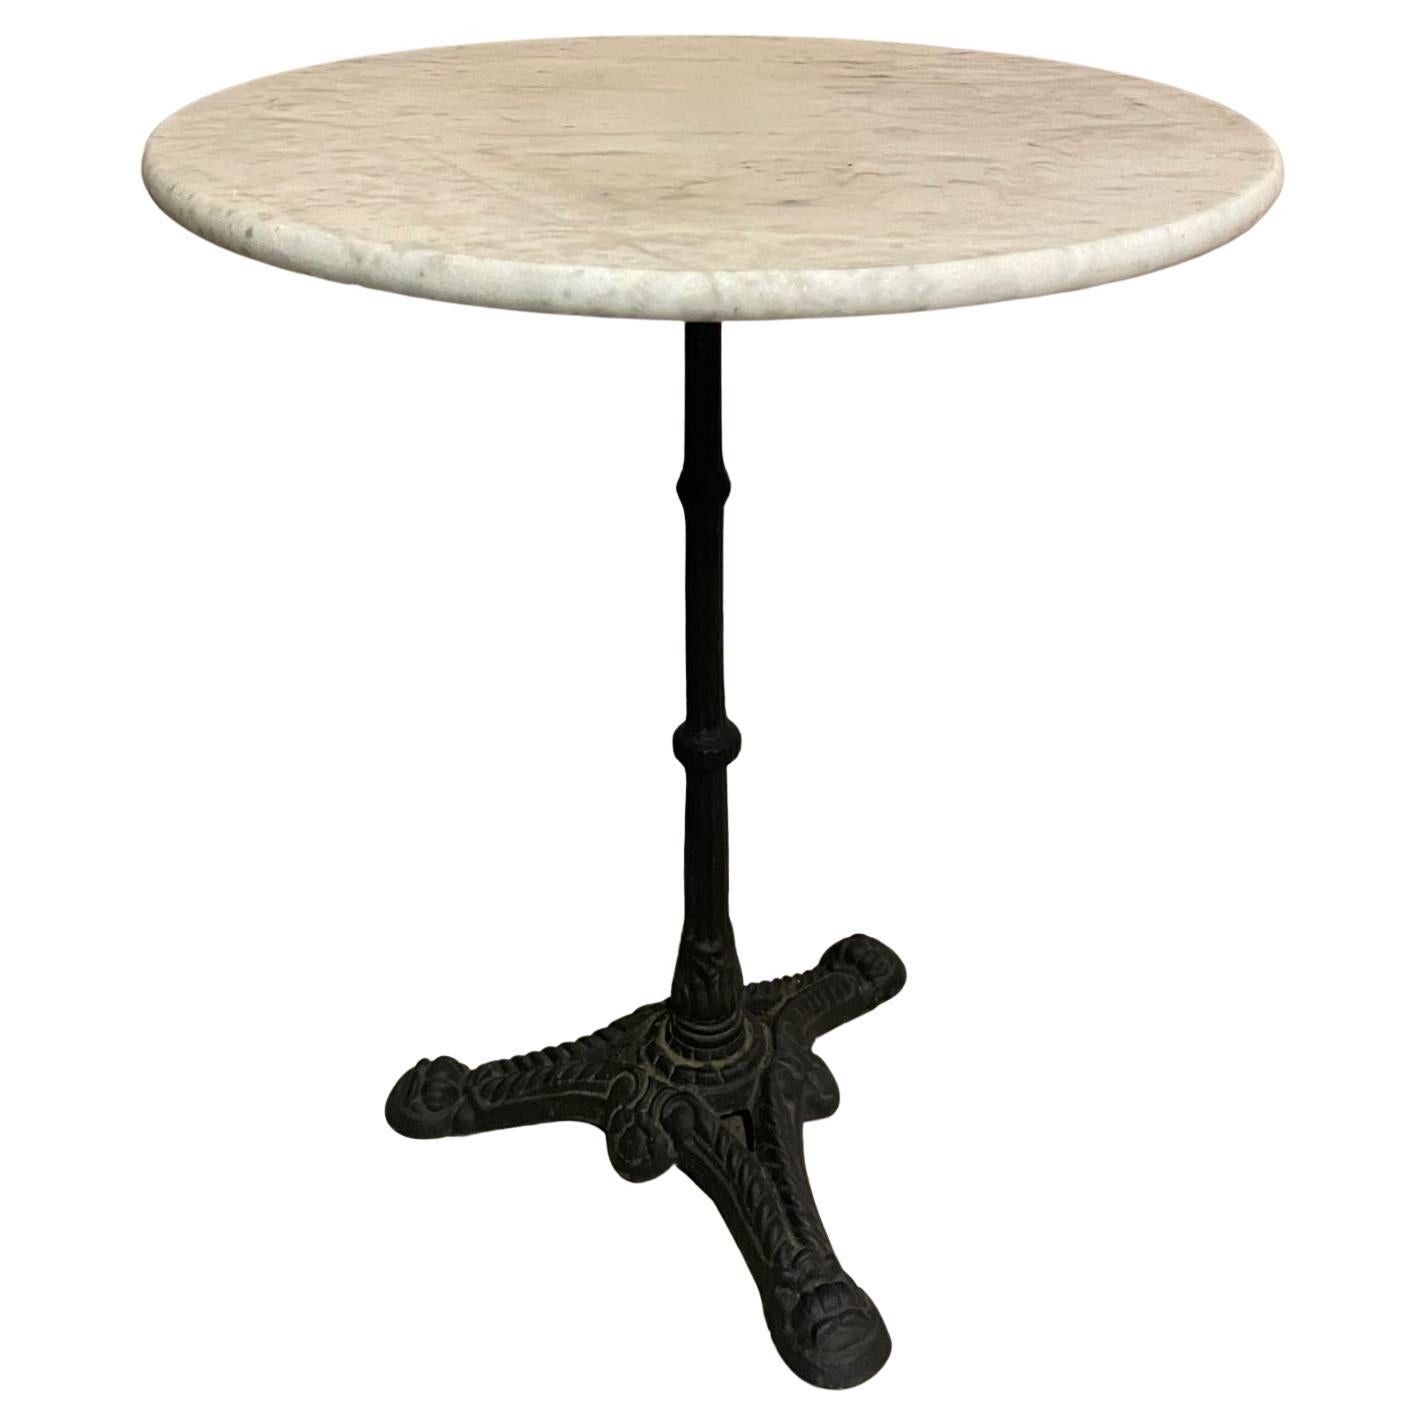 20th century French Marble and Metal Bistro Gueridon, table, 1920s